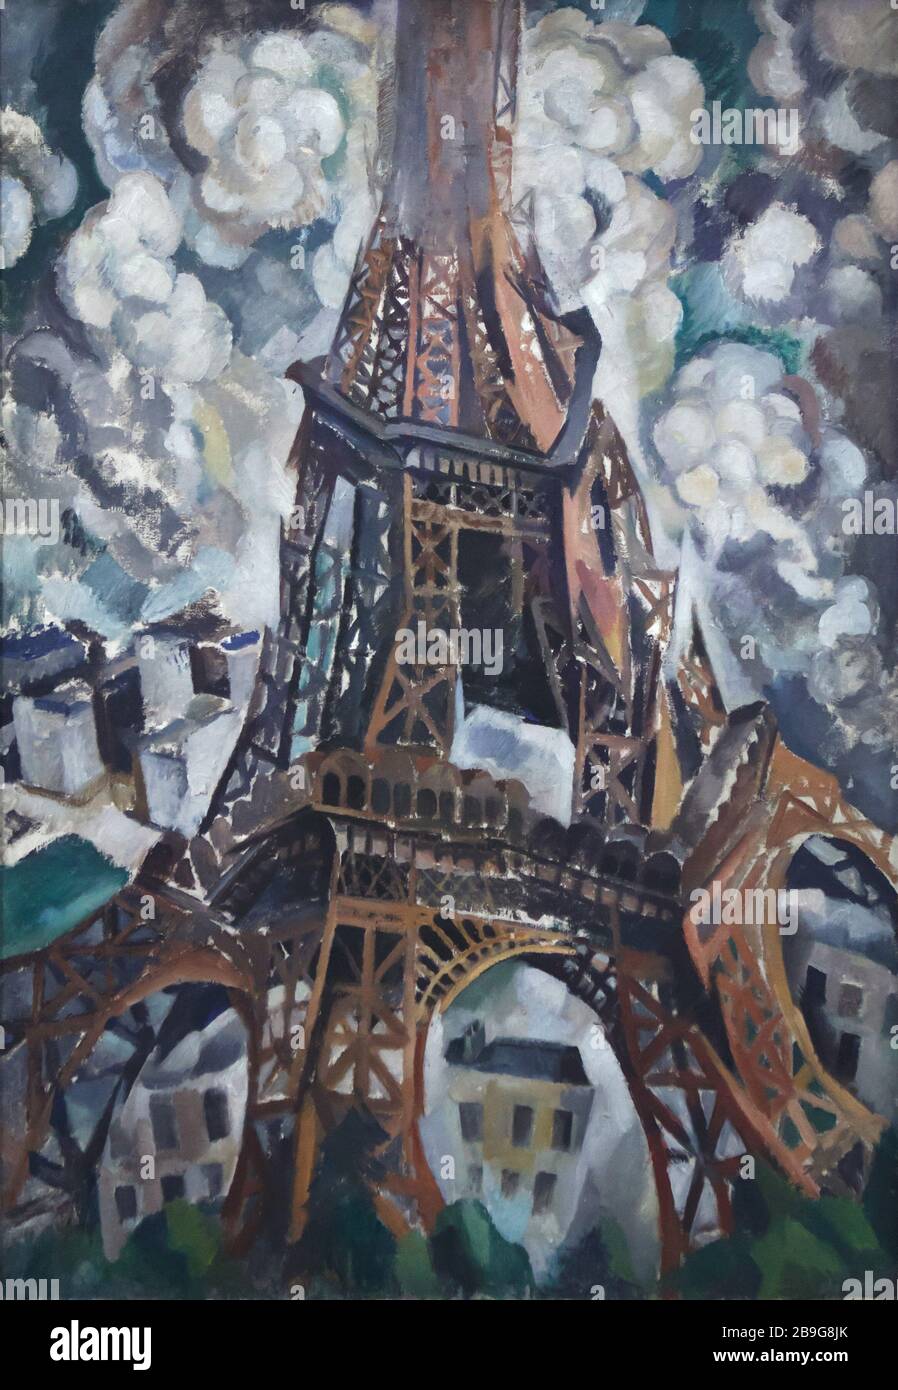 Painting 'Eiffel Tower' by French modernist painter Robert Delaunay (1909-1910) on display in the Staatliche Kunsthalle Karlsruhe (State Art Gallery) in Karlsruhe, Baden-Württemberg, Germany. Stock Photo